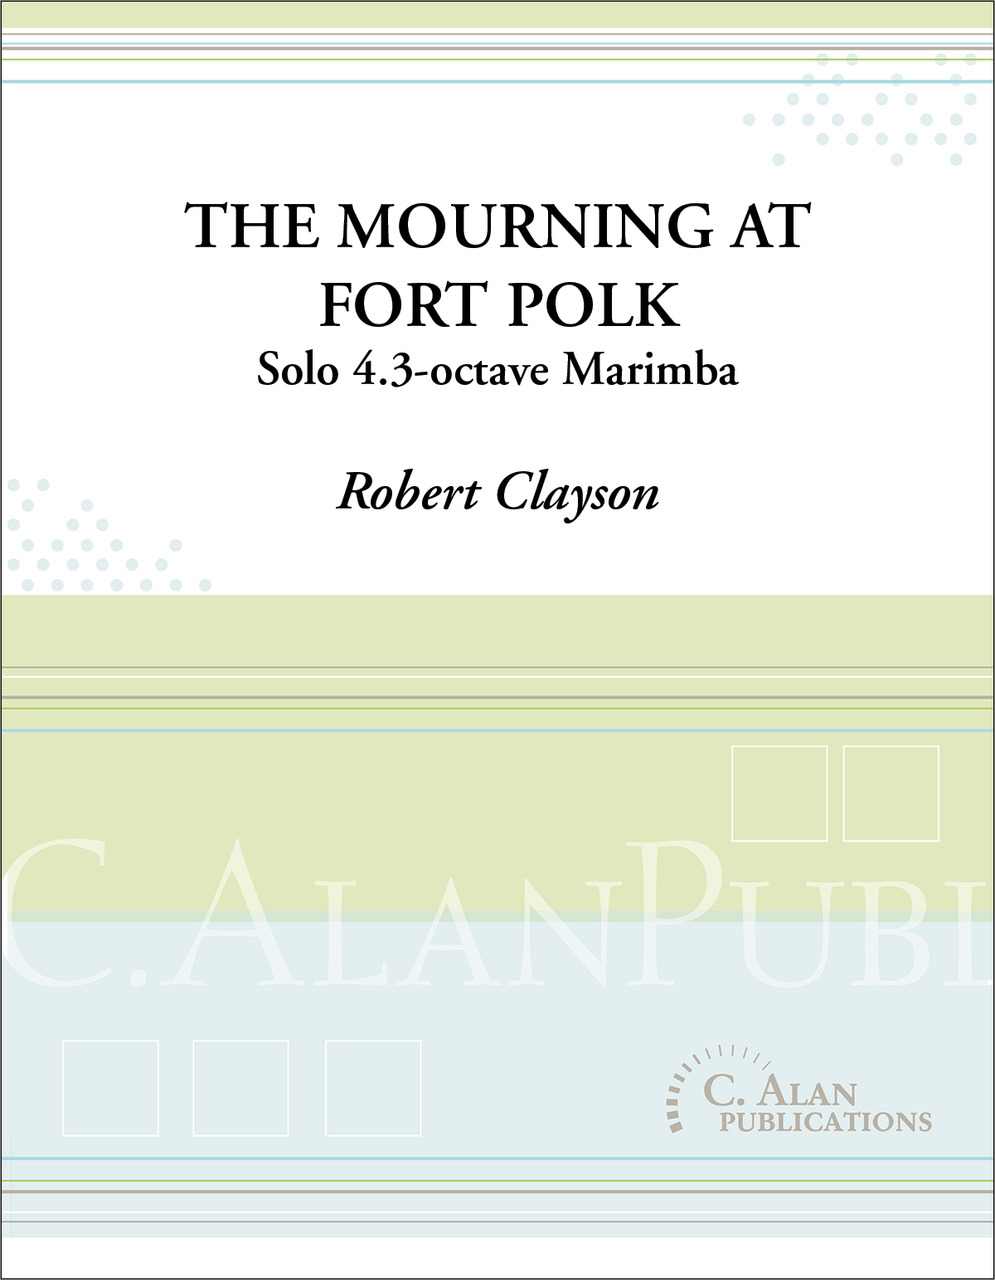 The Mourning at Fort Polk by Robert Clyson